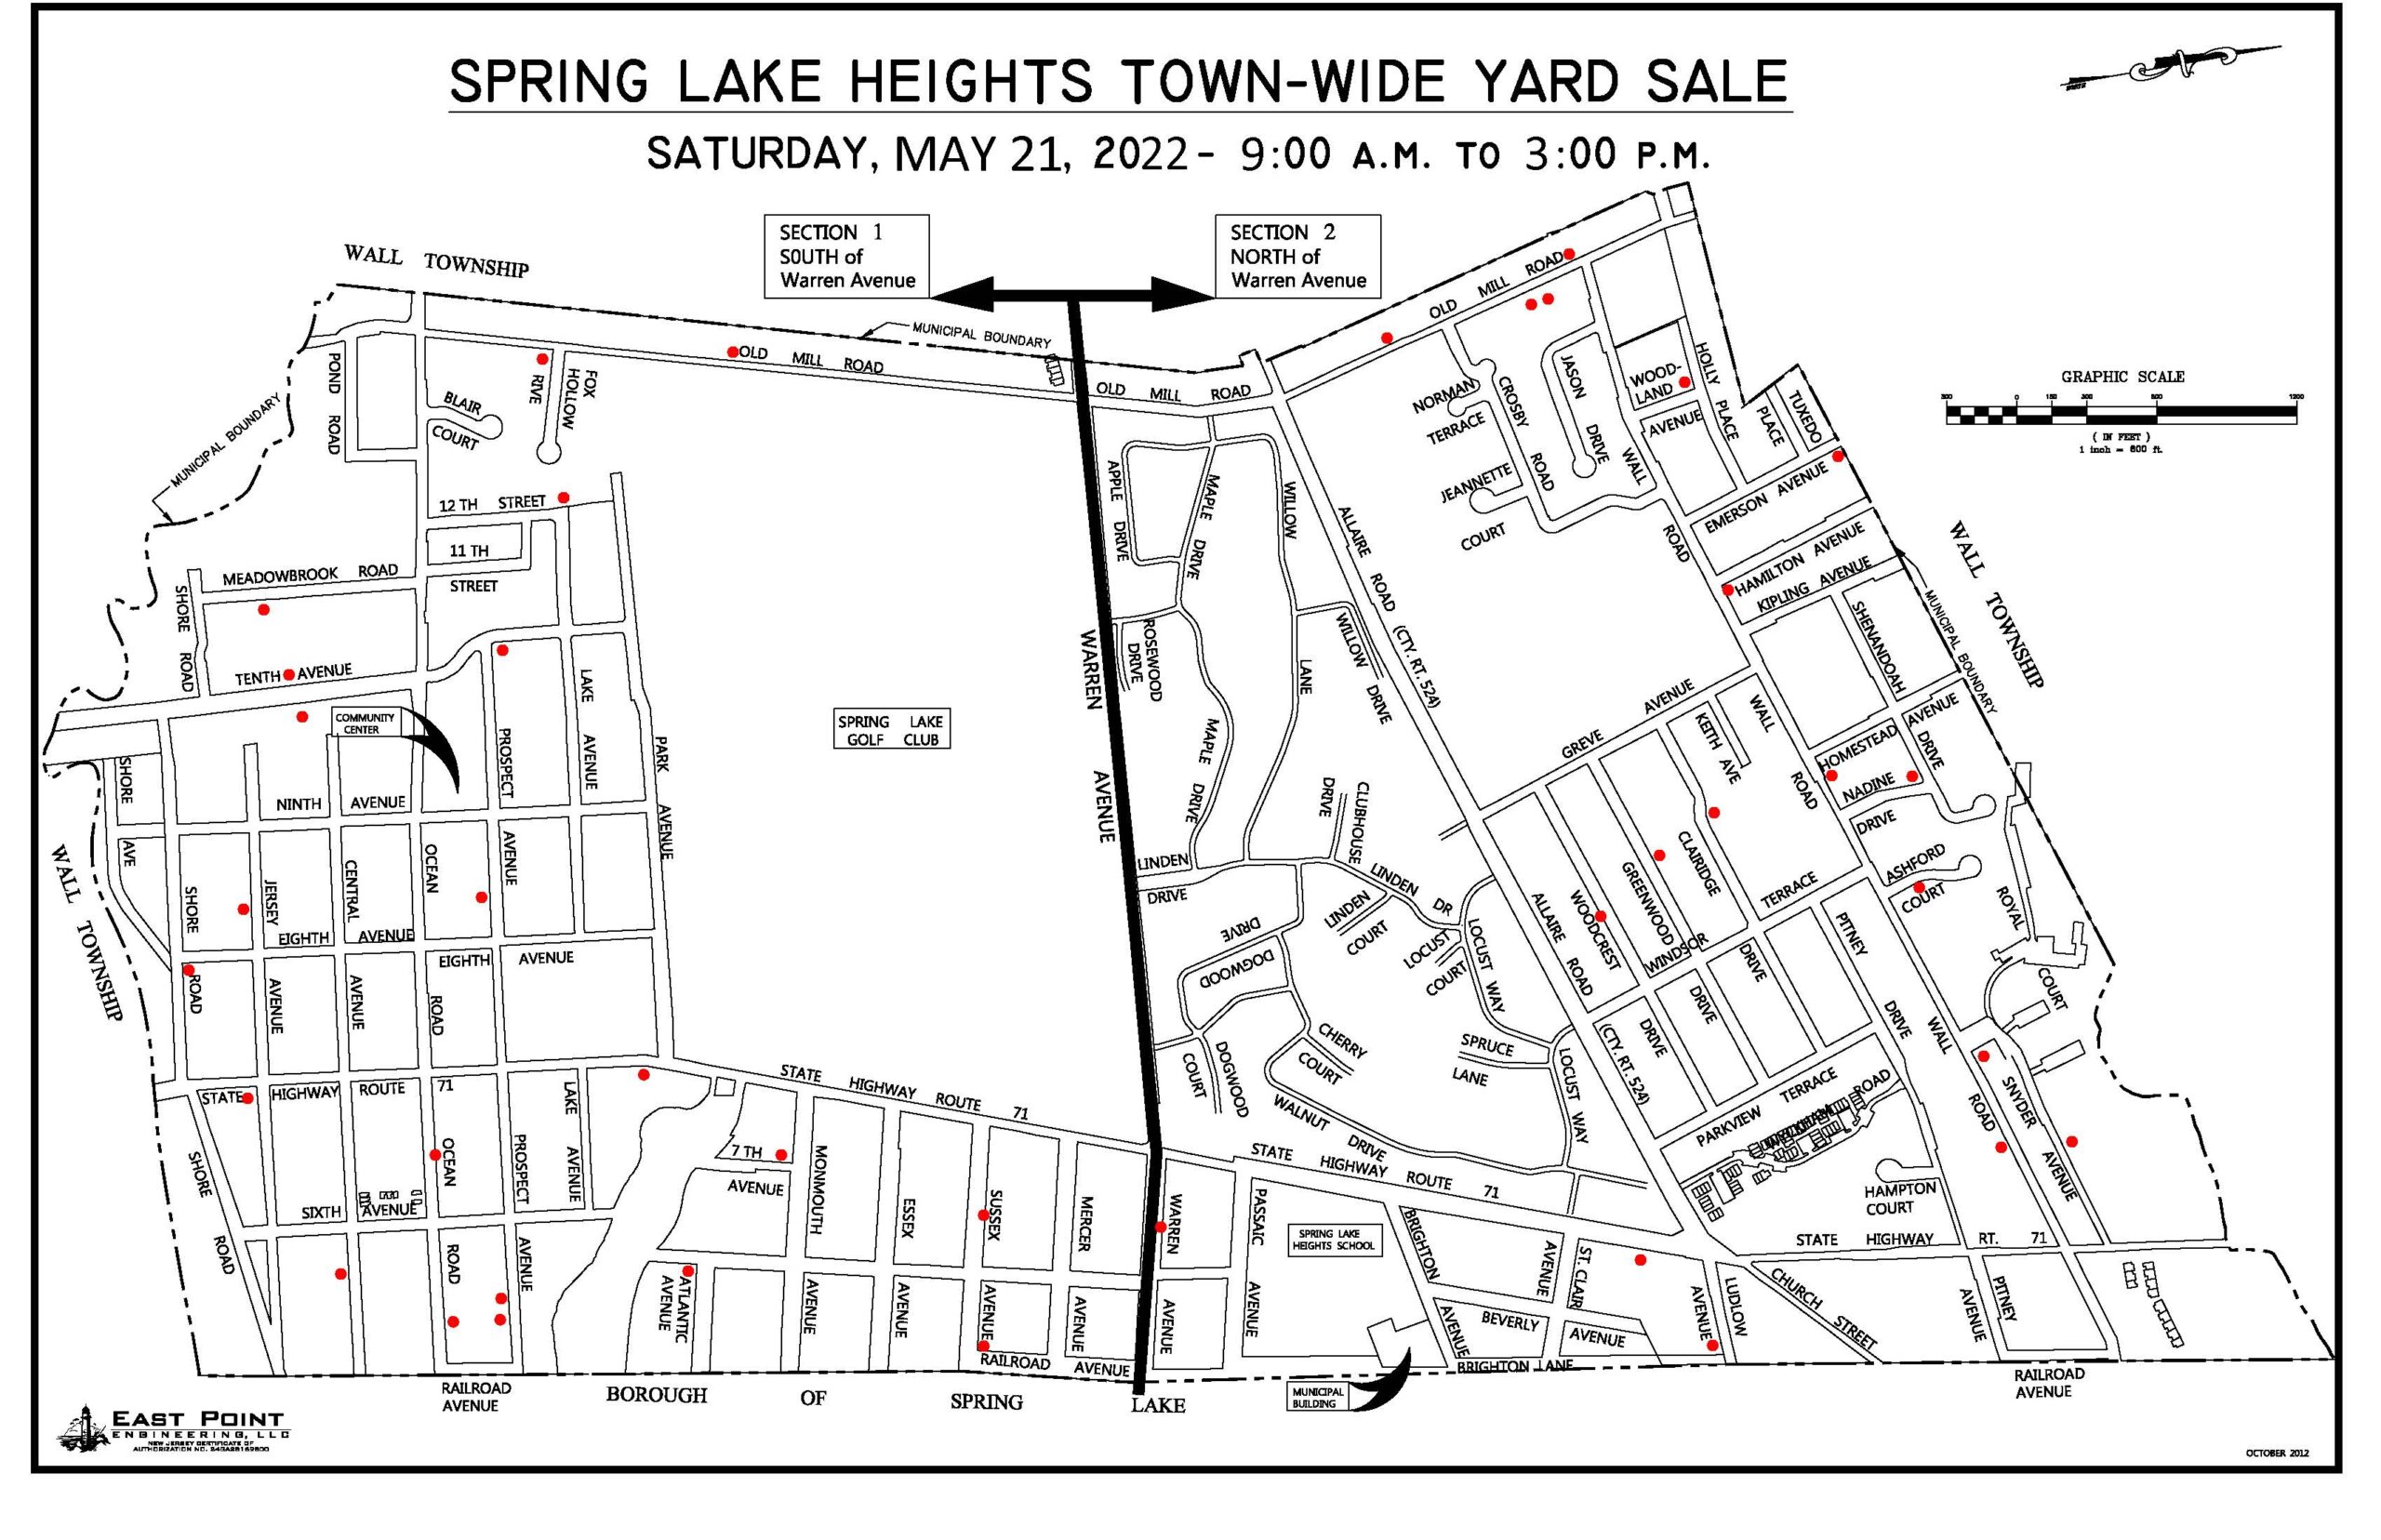 2022 TownWide Yard Sale Map Available Spring Lake Heights New Jersey